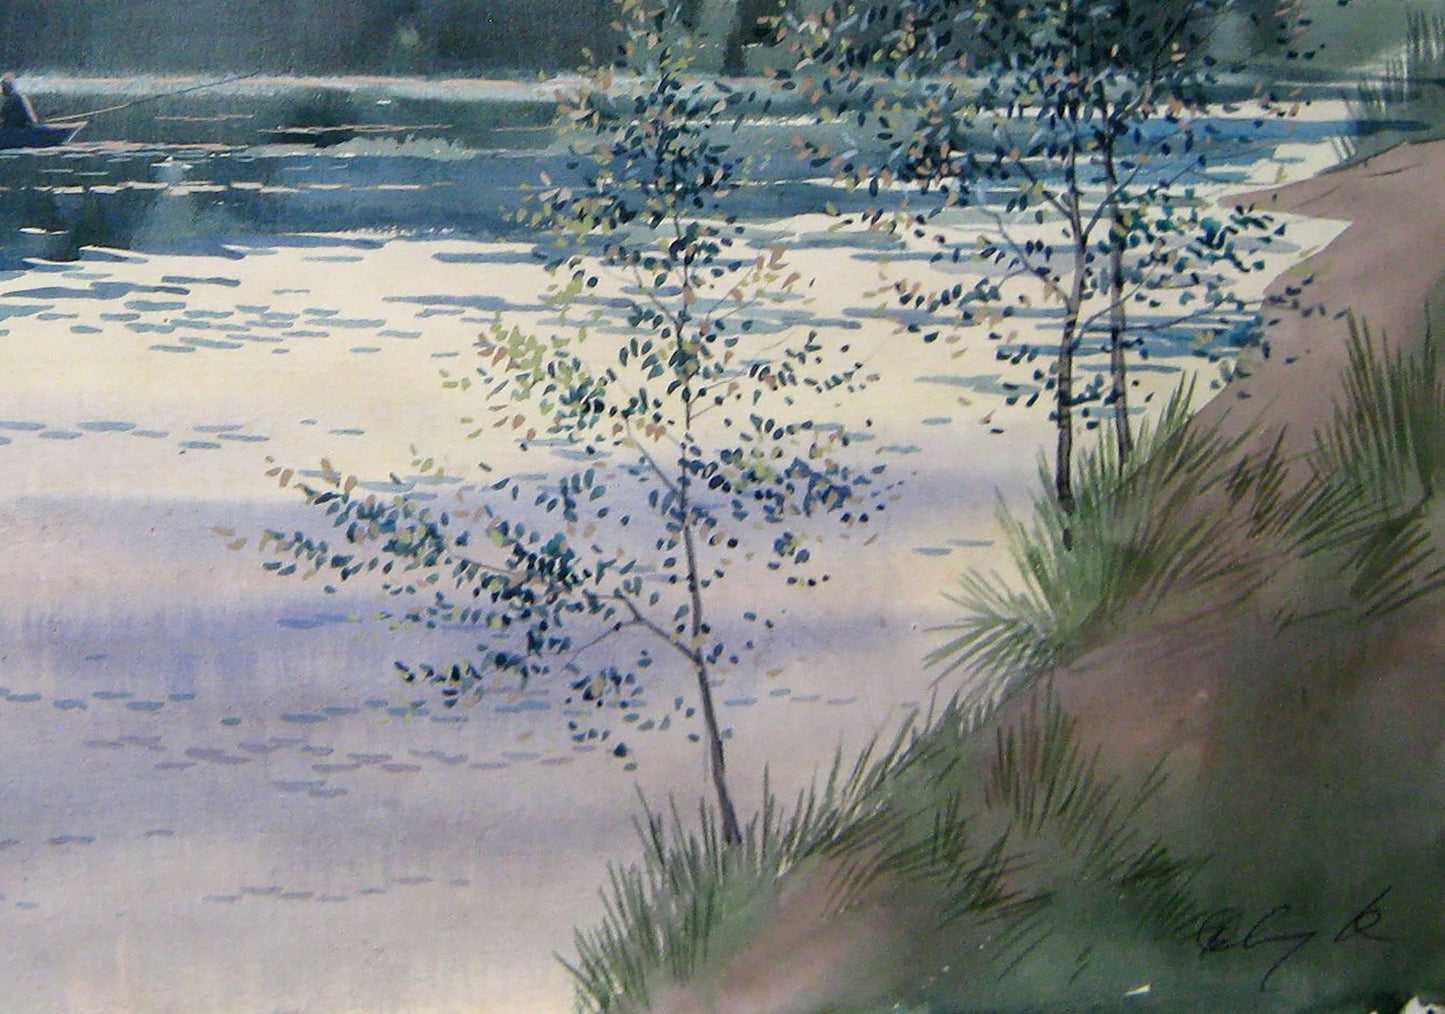 The watercolor "The Evening is Quiet" by Valery Savenets